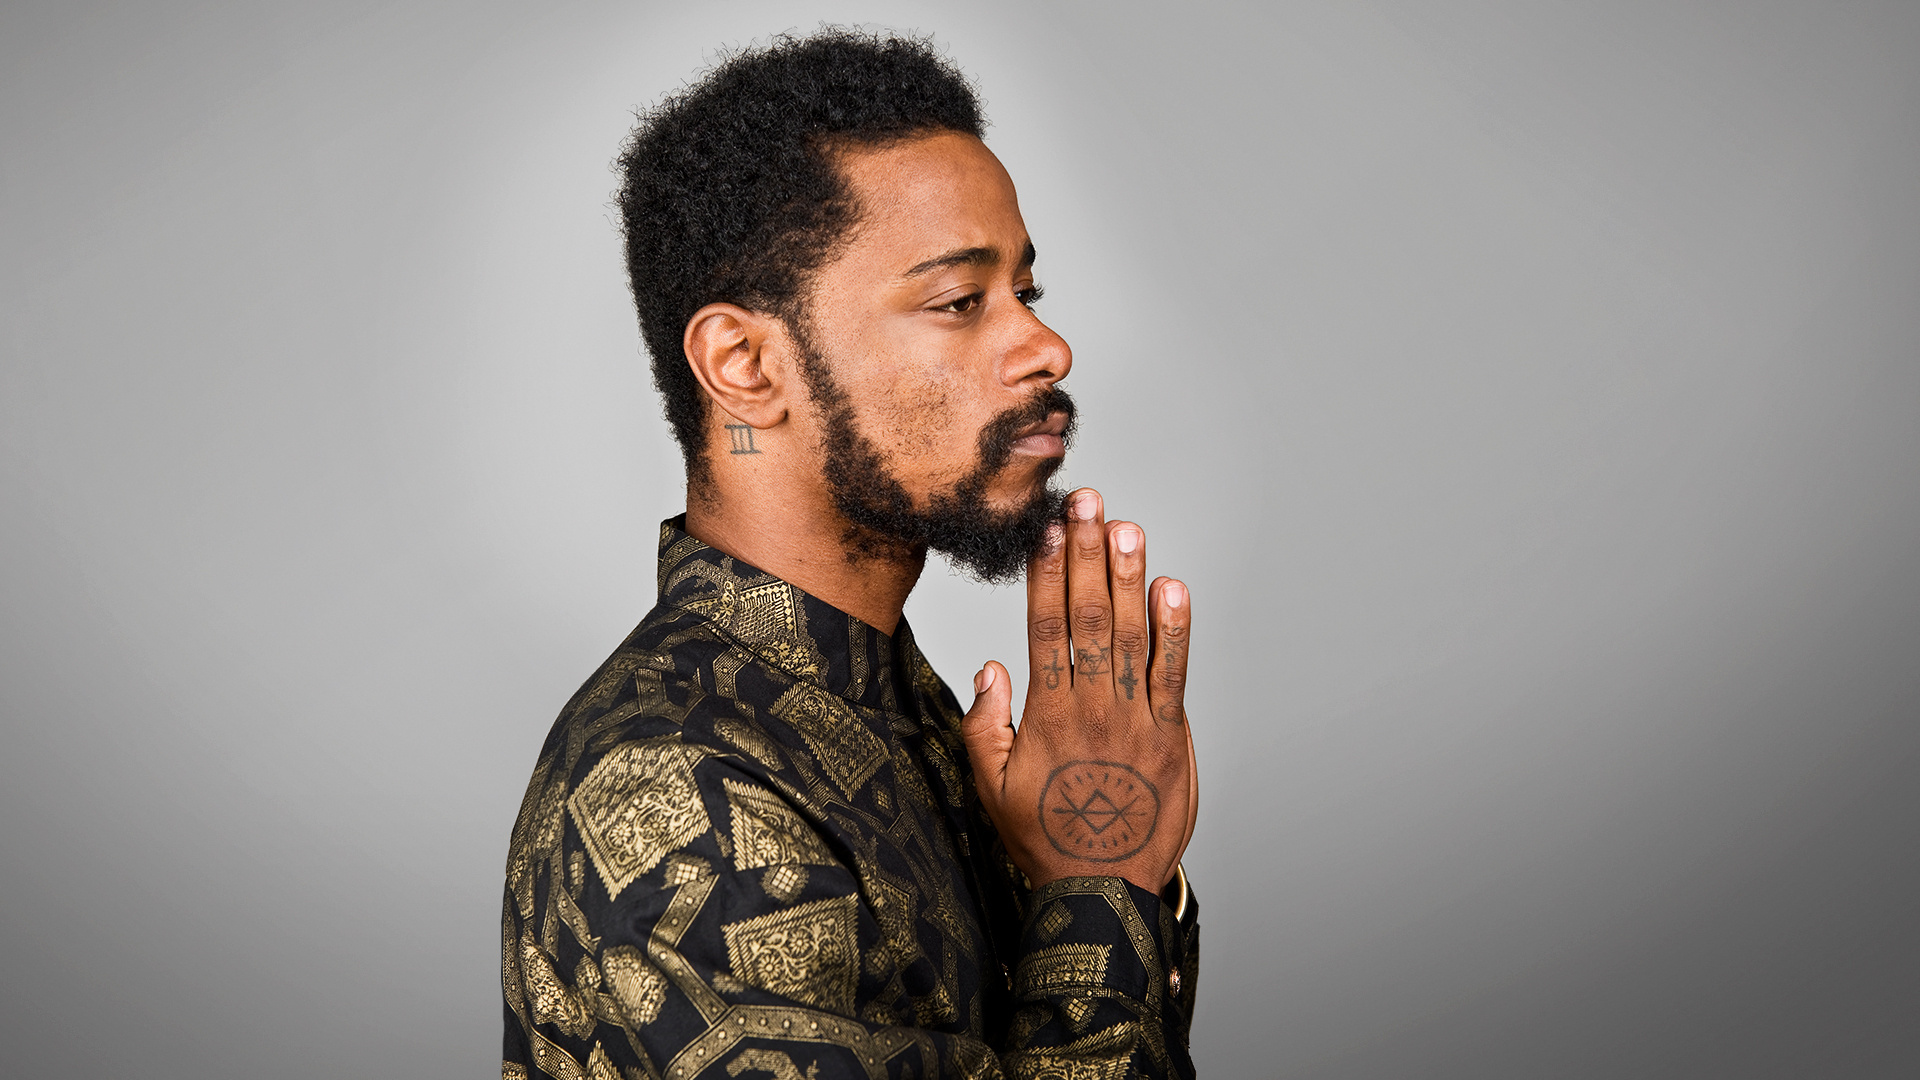 LaKeith Stanfield, Confused, Oscar nomination, Supporting actor, 1920x1080 Full HD Desktop